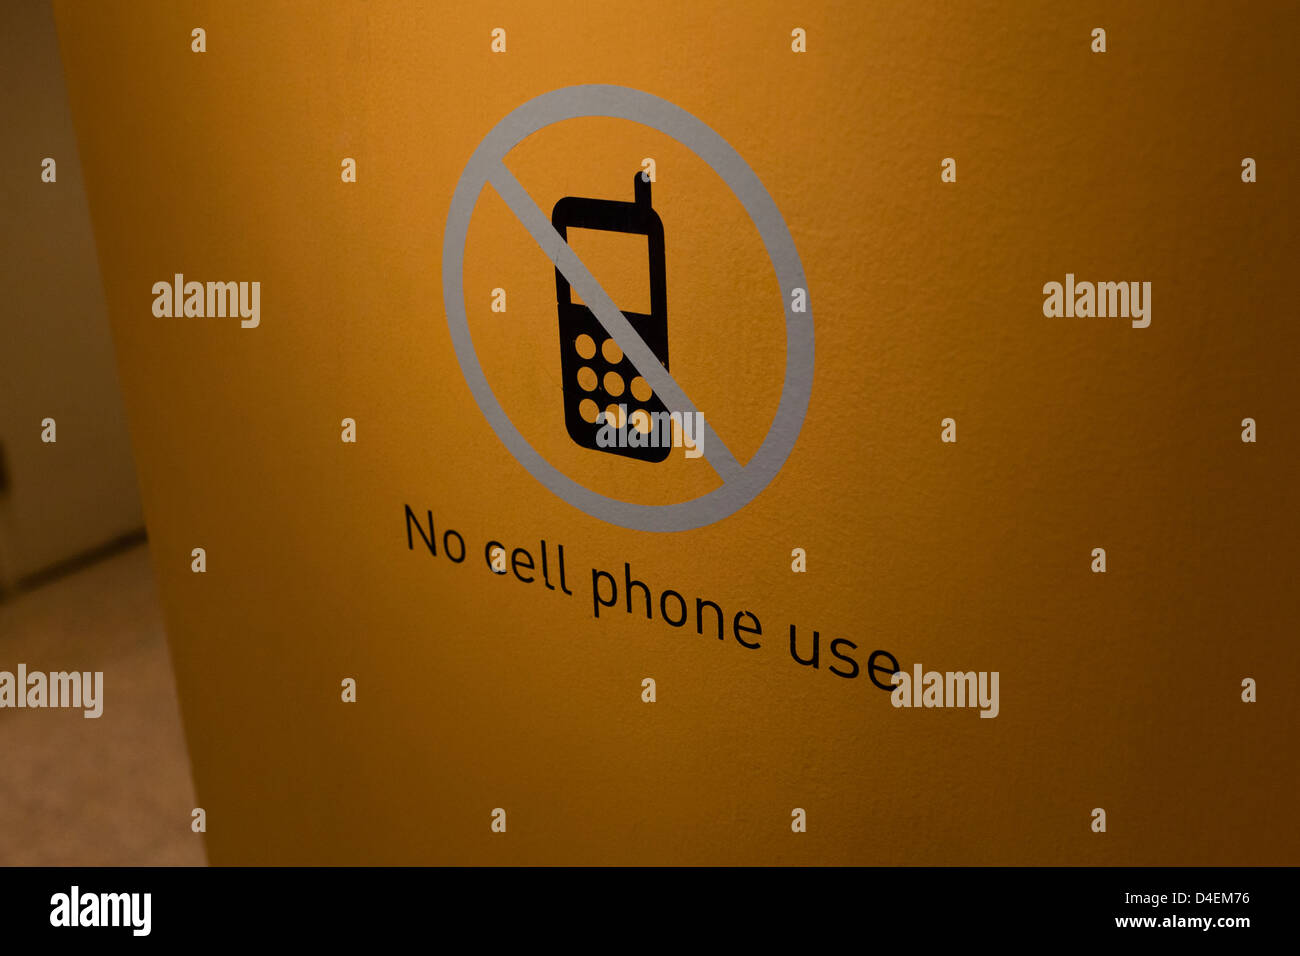 No cell phone use sign Stock Photo